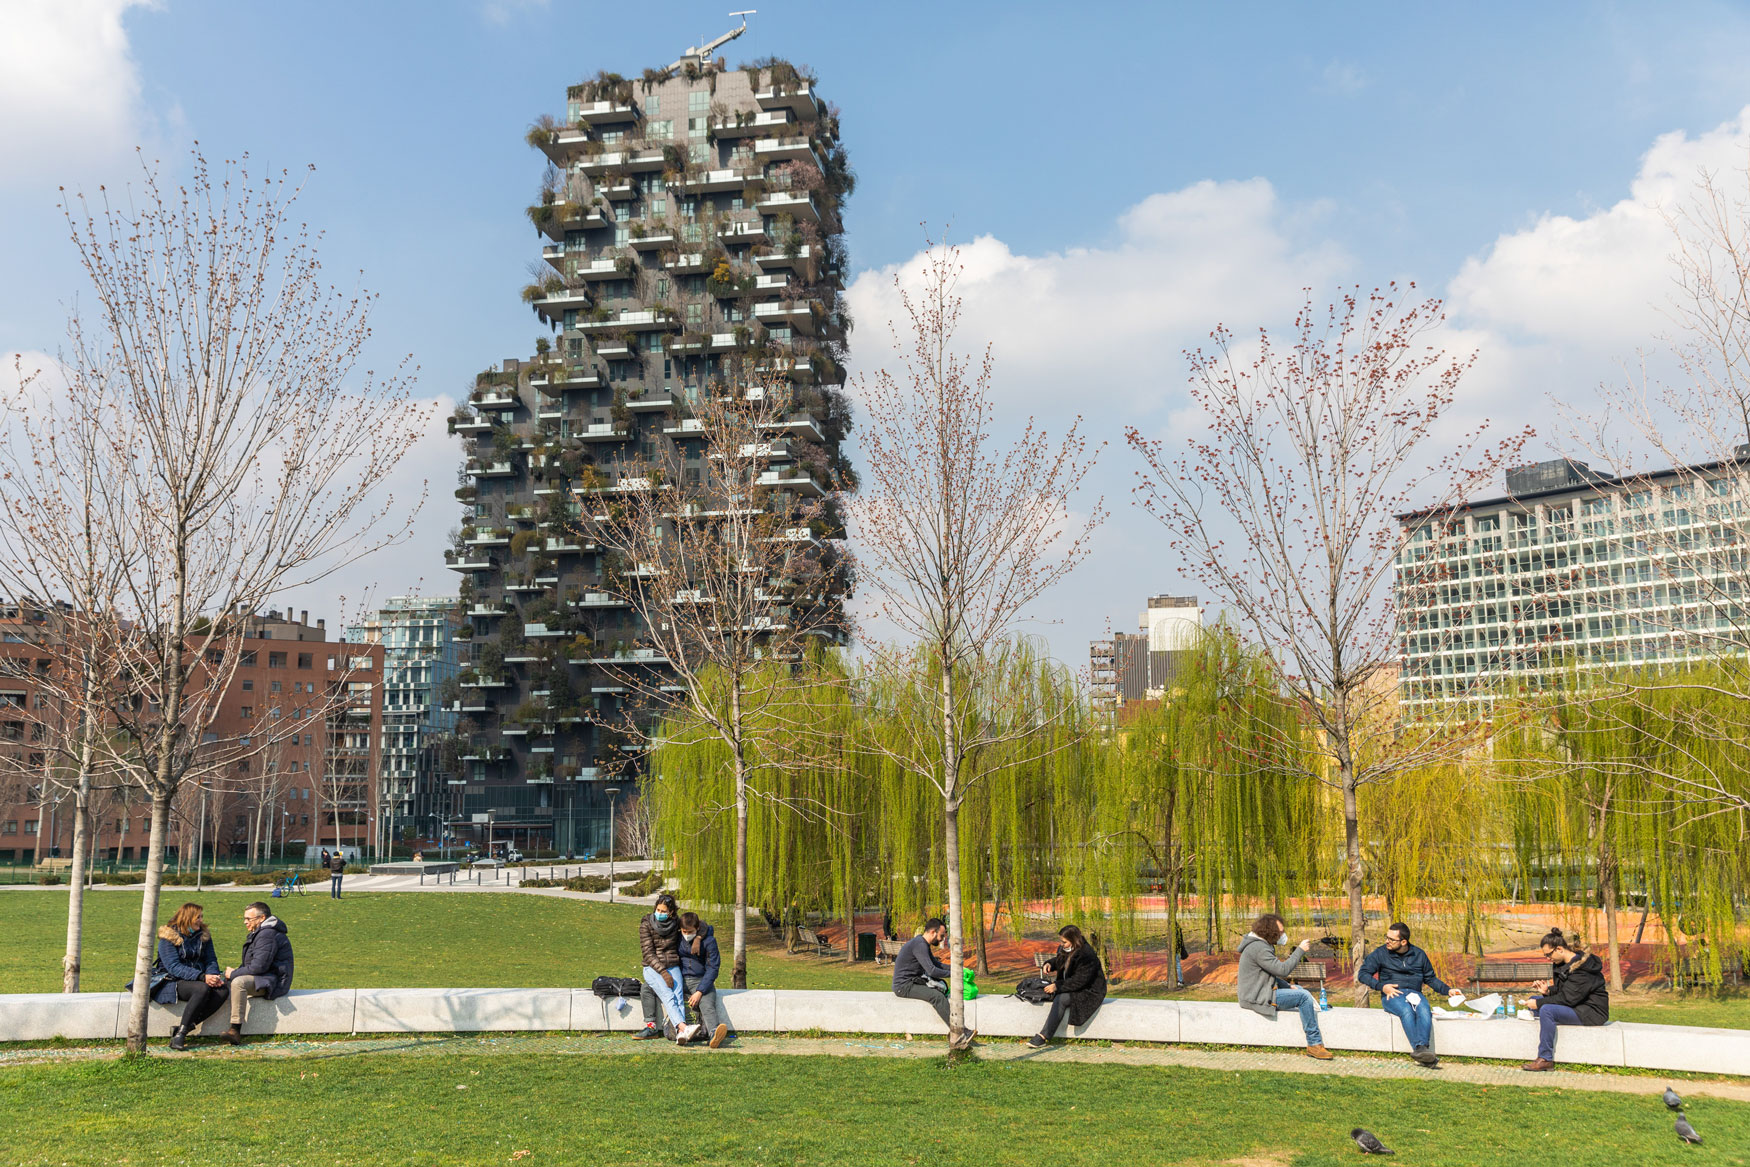 The two towers of the Bosco Verticale project in Milan, Italy